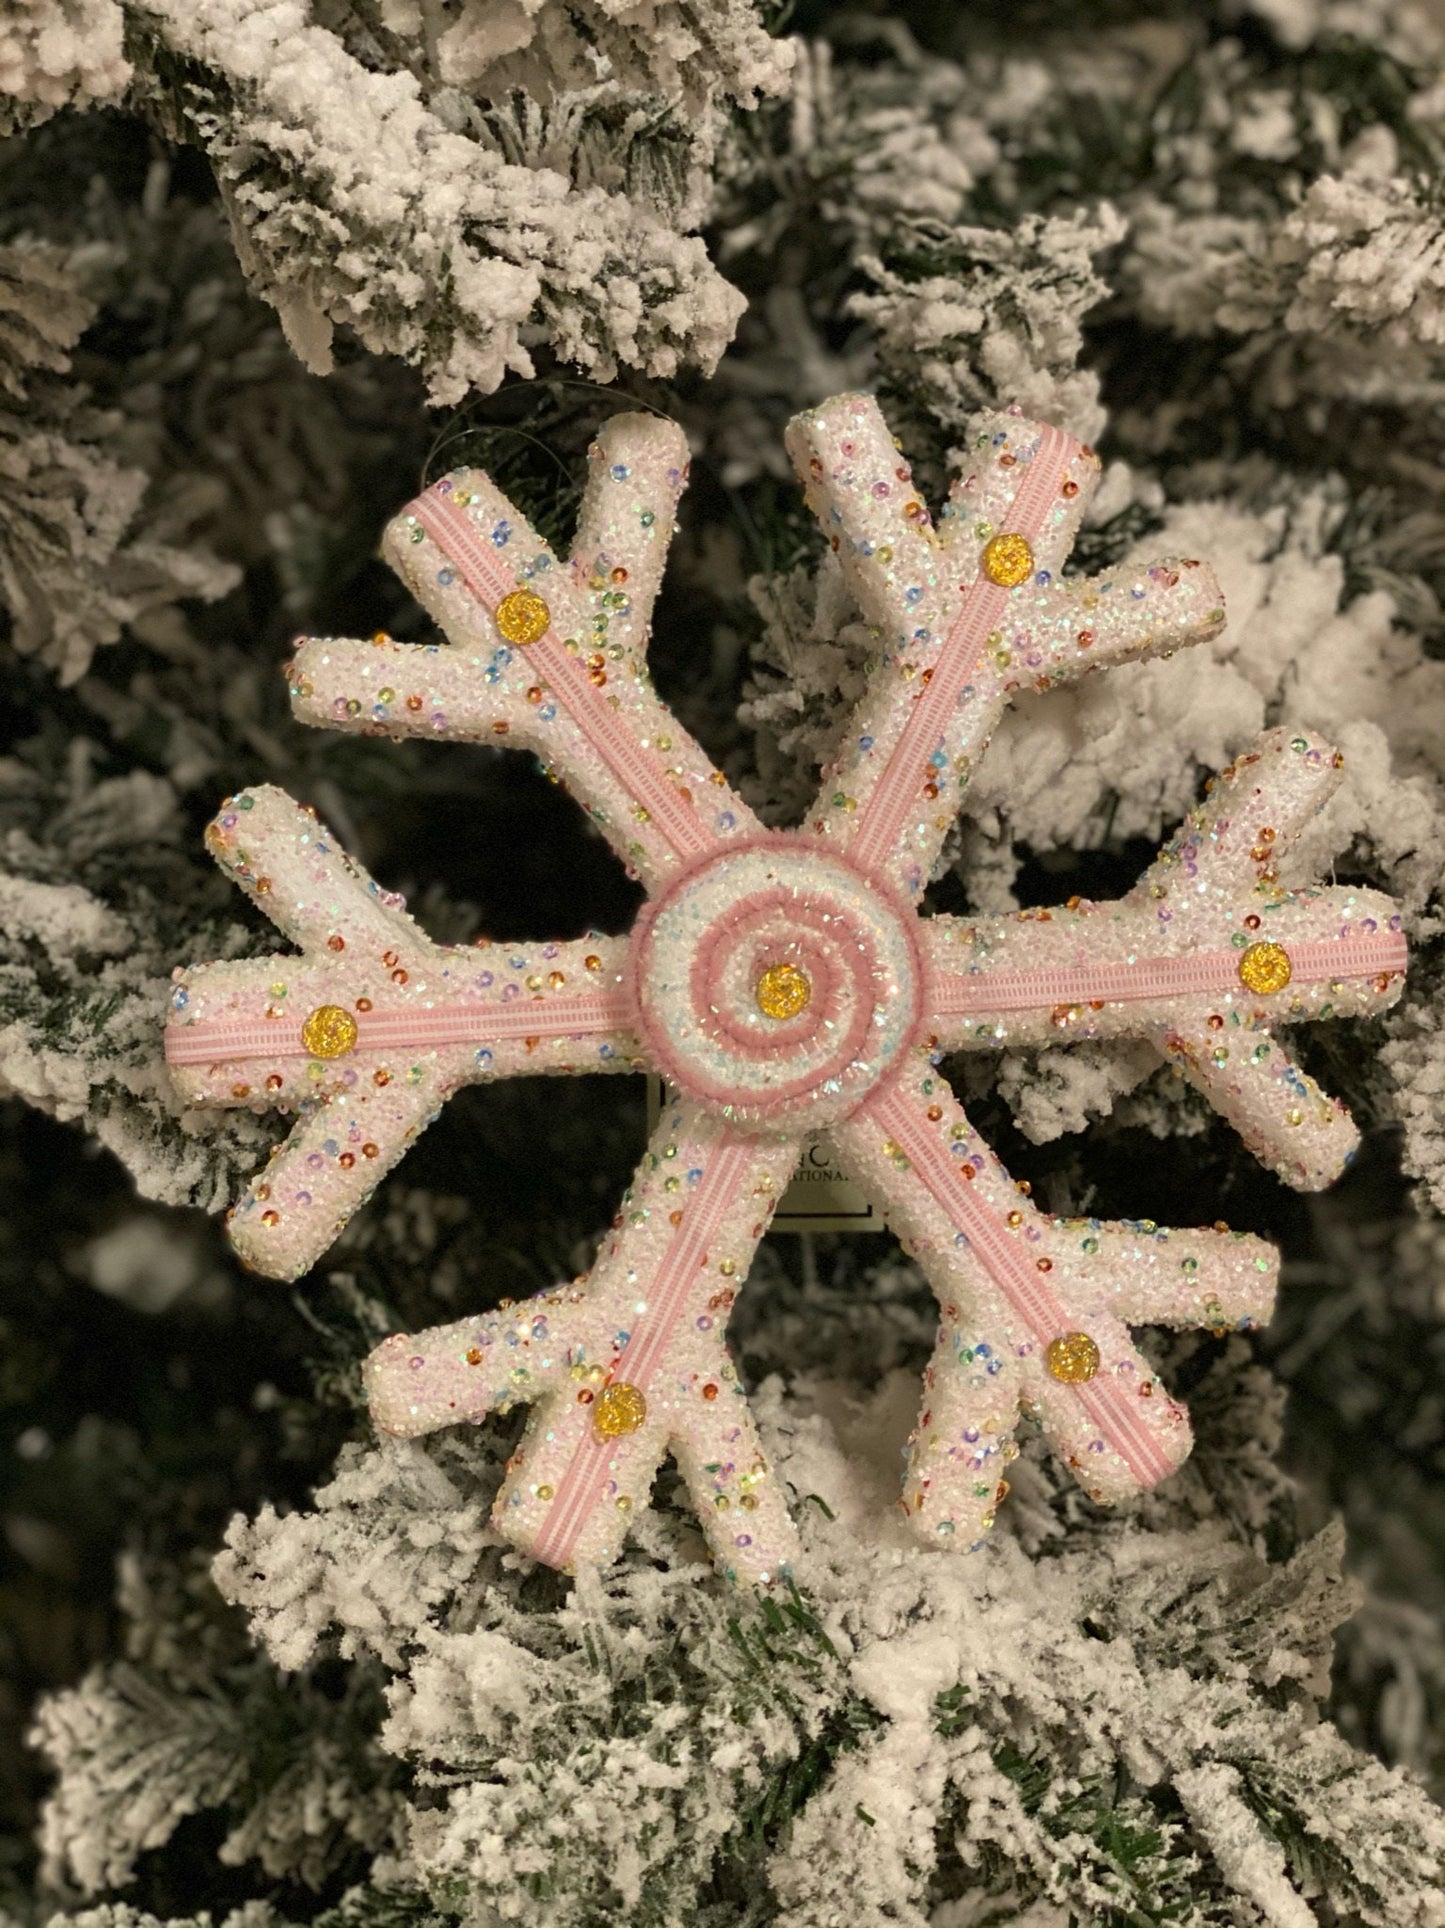 10" Candy sprinkles snowflake ornament